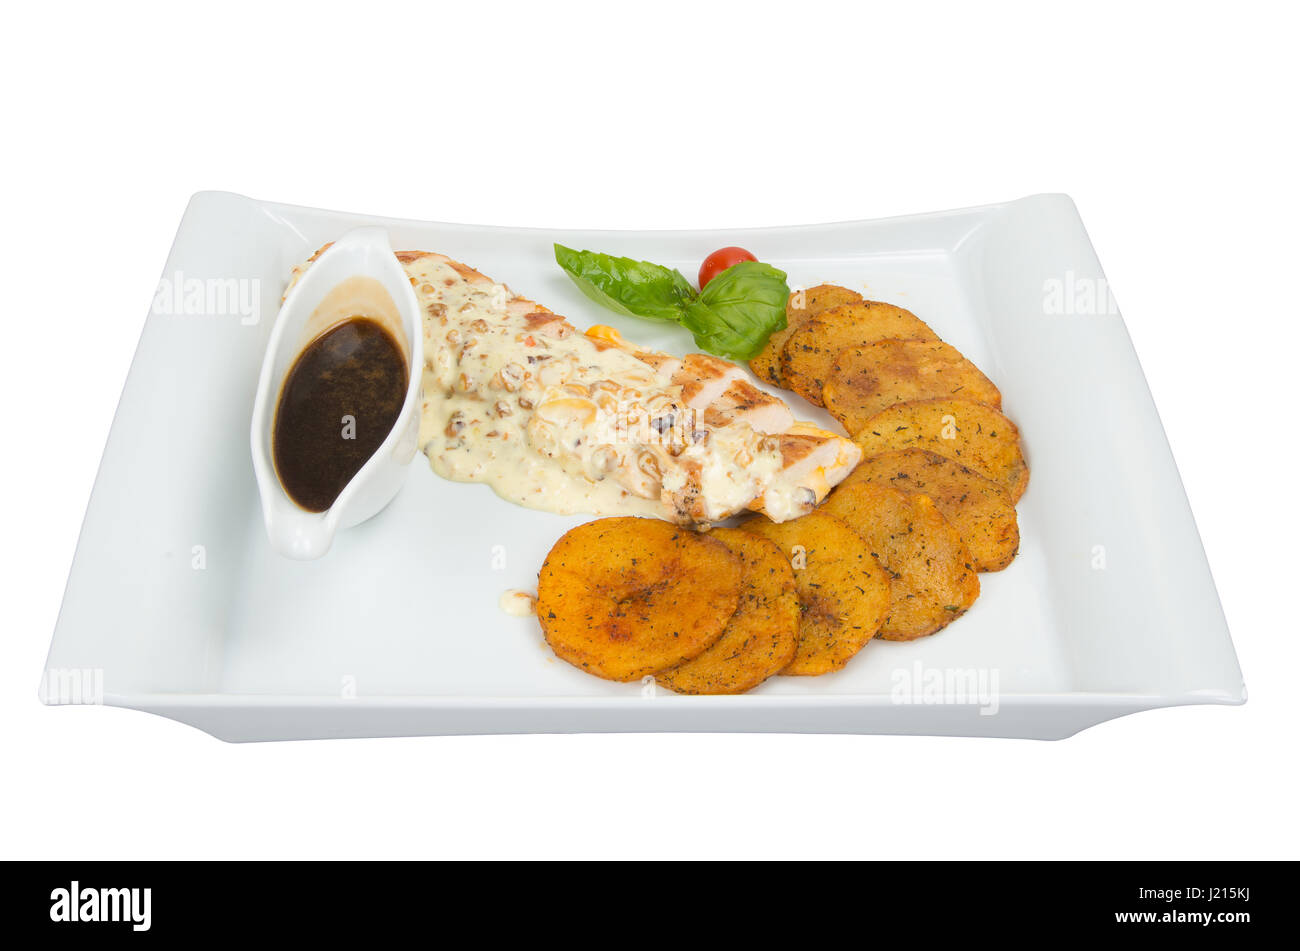 Portion of roast fillet of white chicken with mushroom sauce and roasted potatoes. Stock Photo